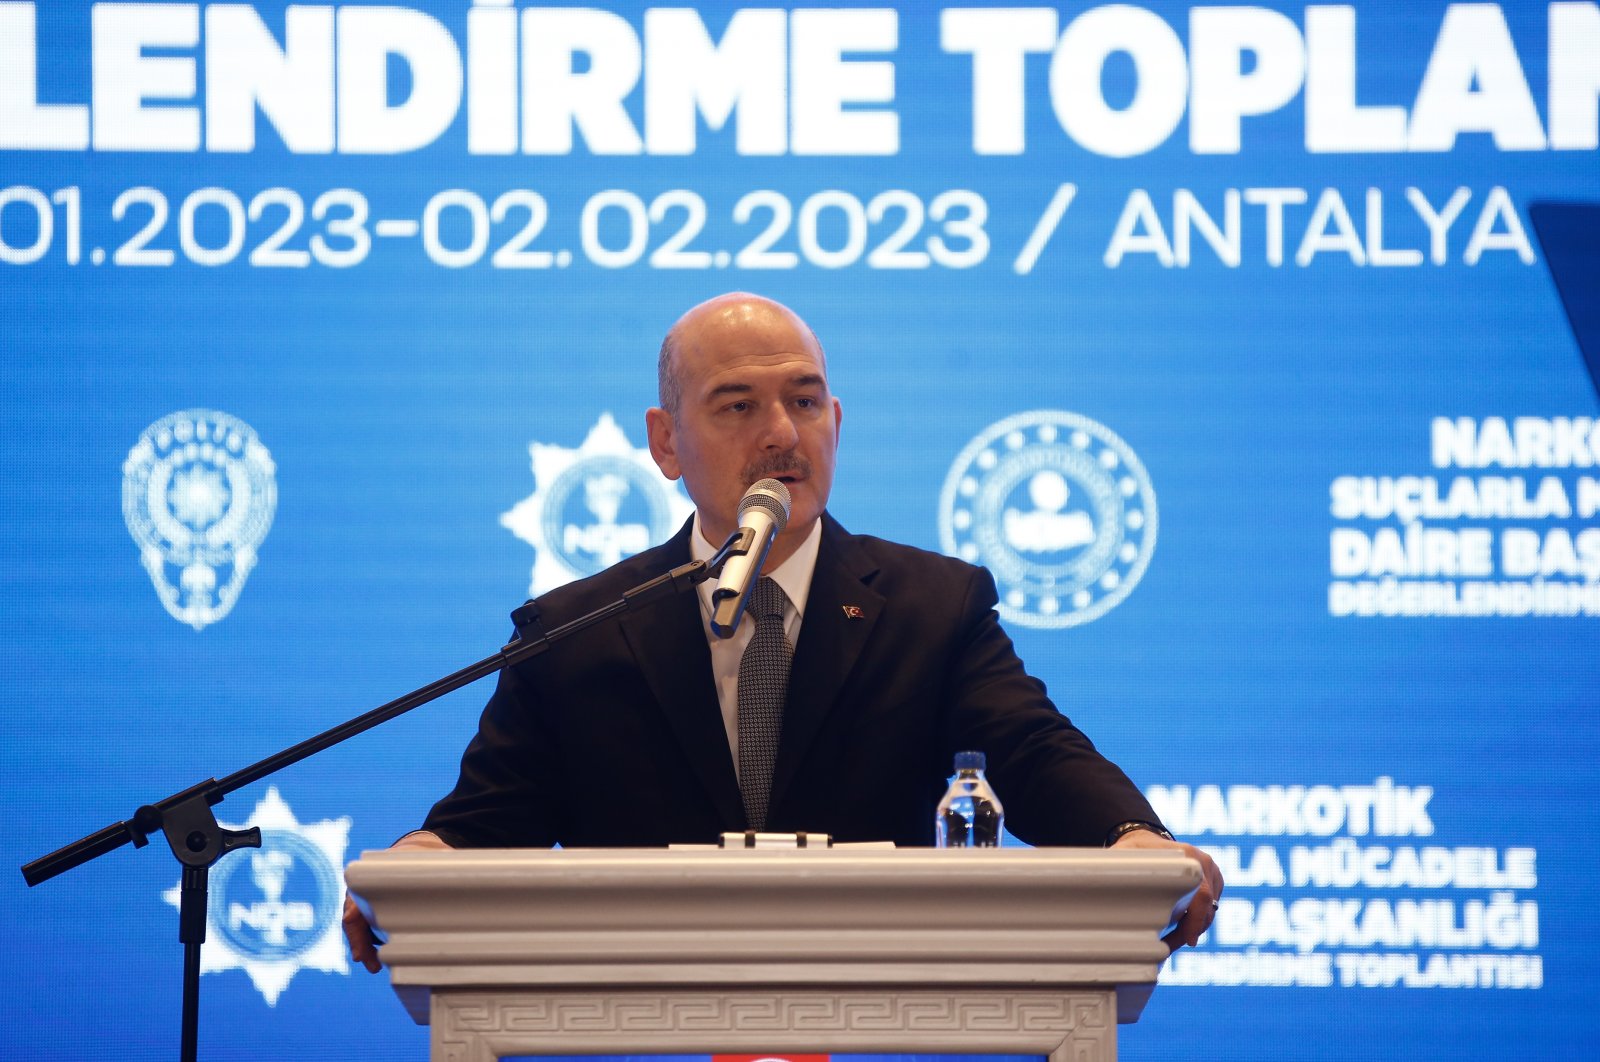 Minister of Interior, Süleyman Soylu, delivers a speech at the Anti-Narcotic Crimes Evaluation Meeting, Antalya, Jan. 31, 2023. (AA Photo)